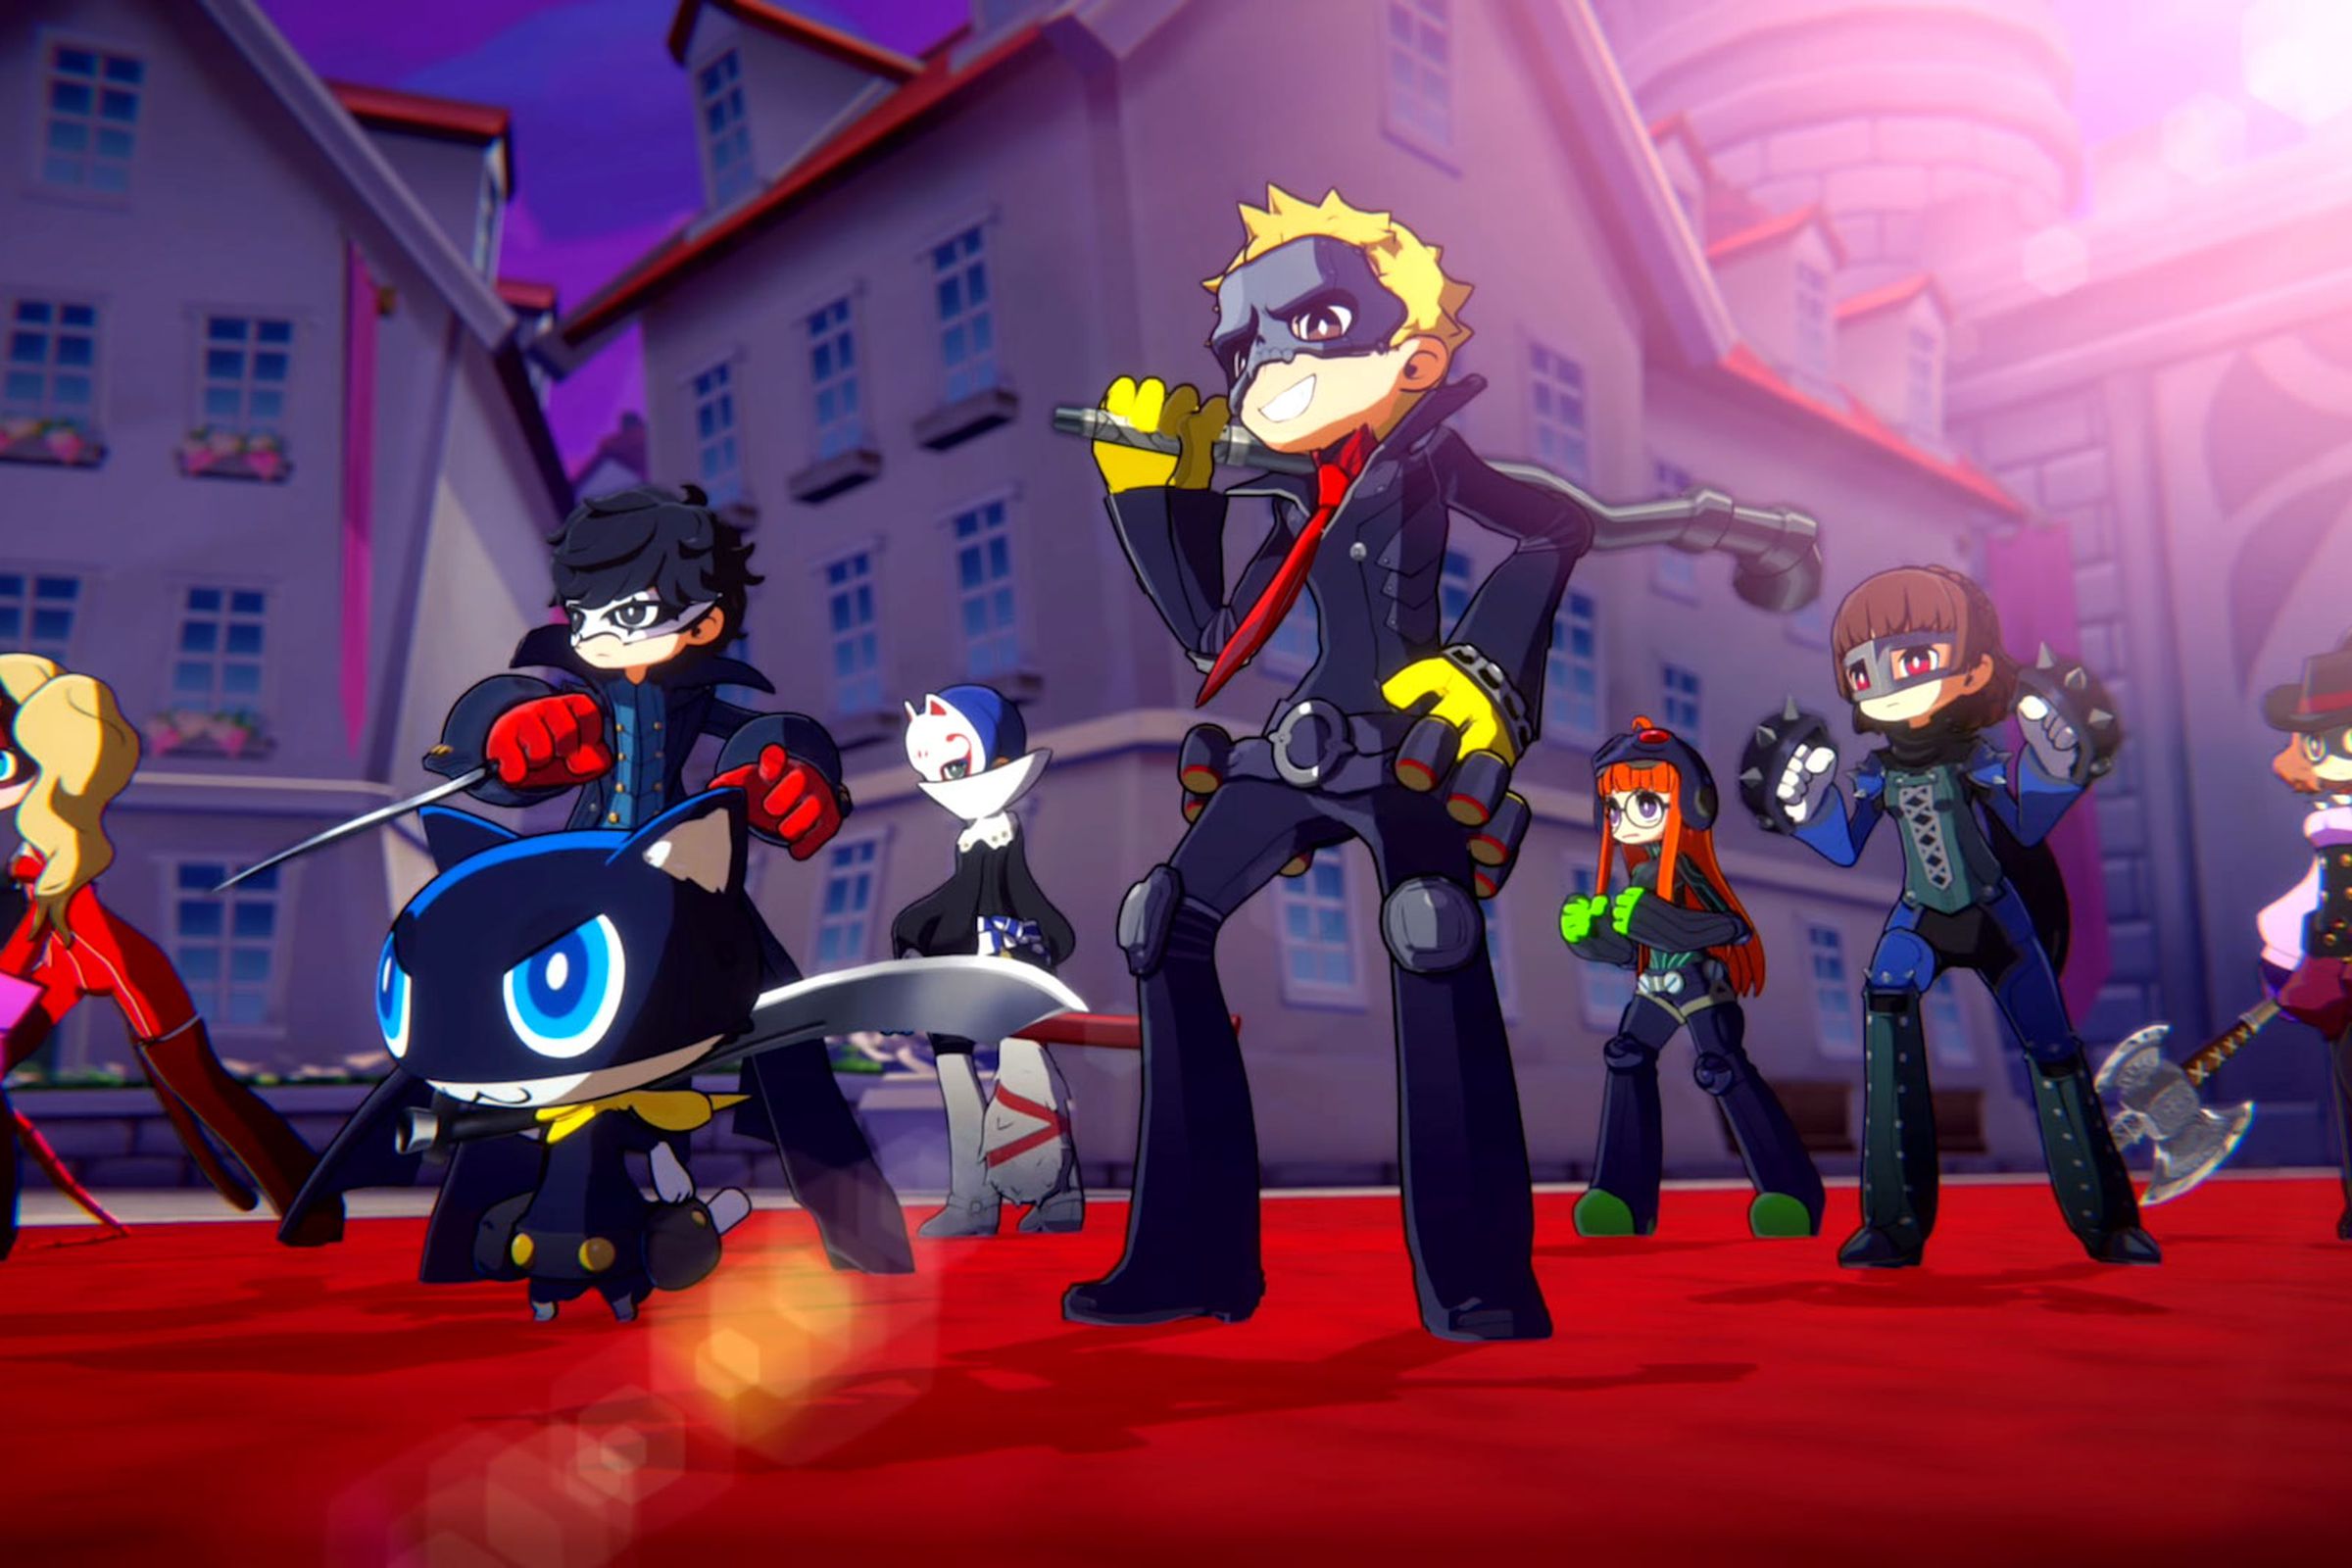 Screenshot from Persona 5 Tactica featuring the Phantom Thieves standing together on a red carpet